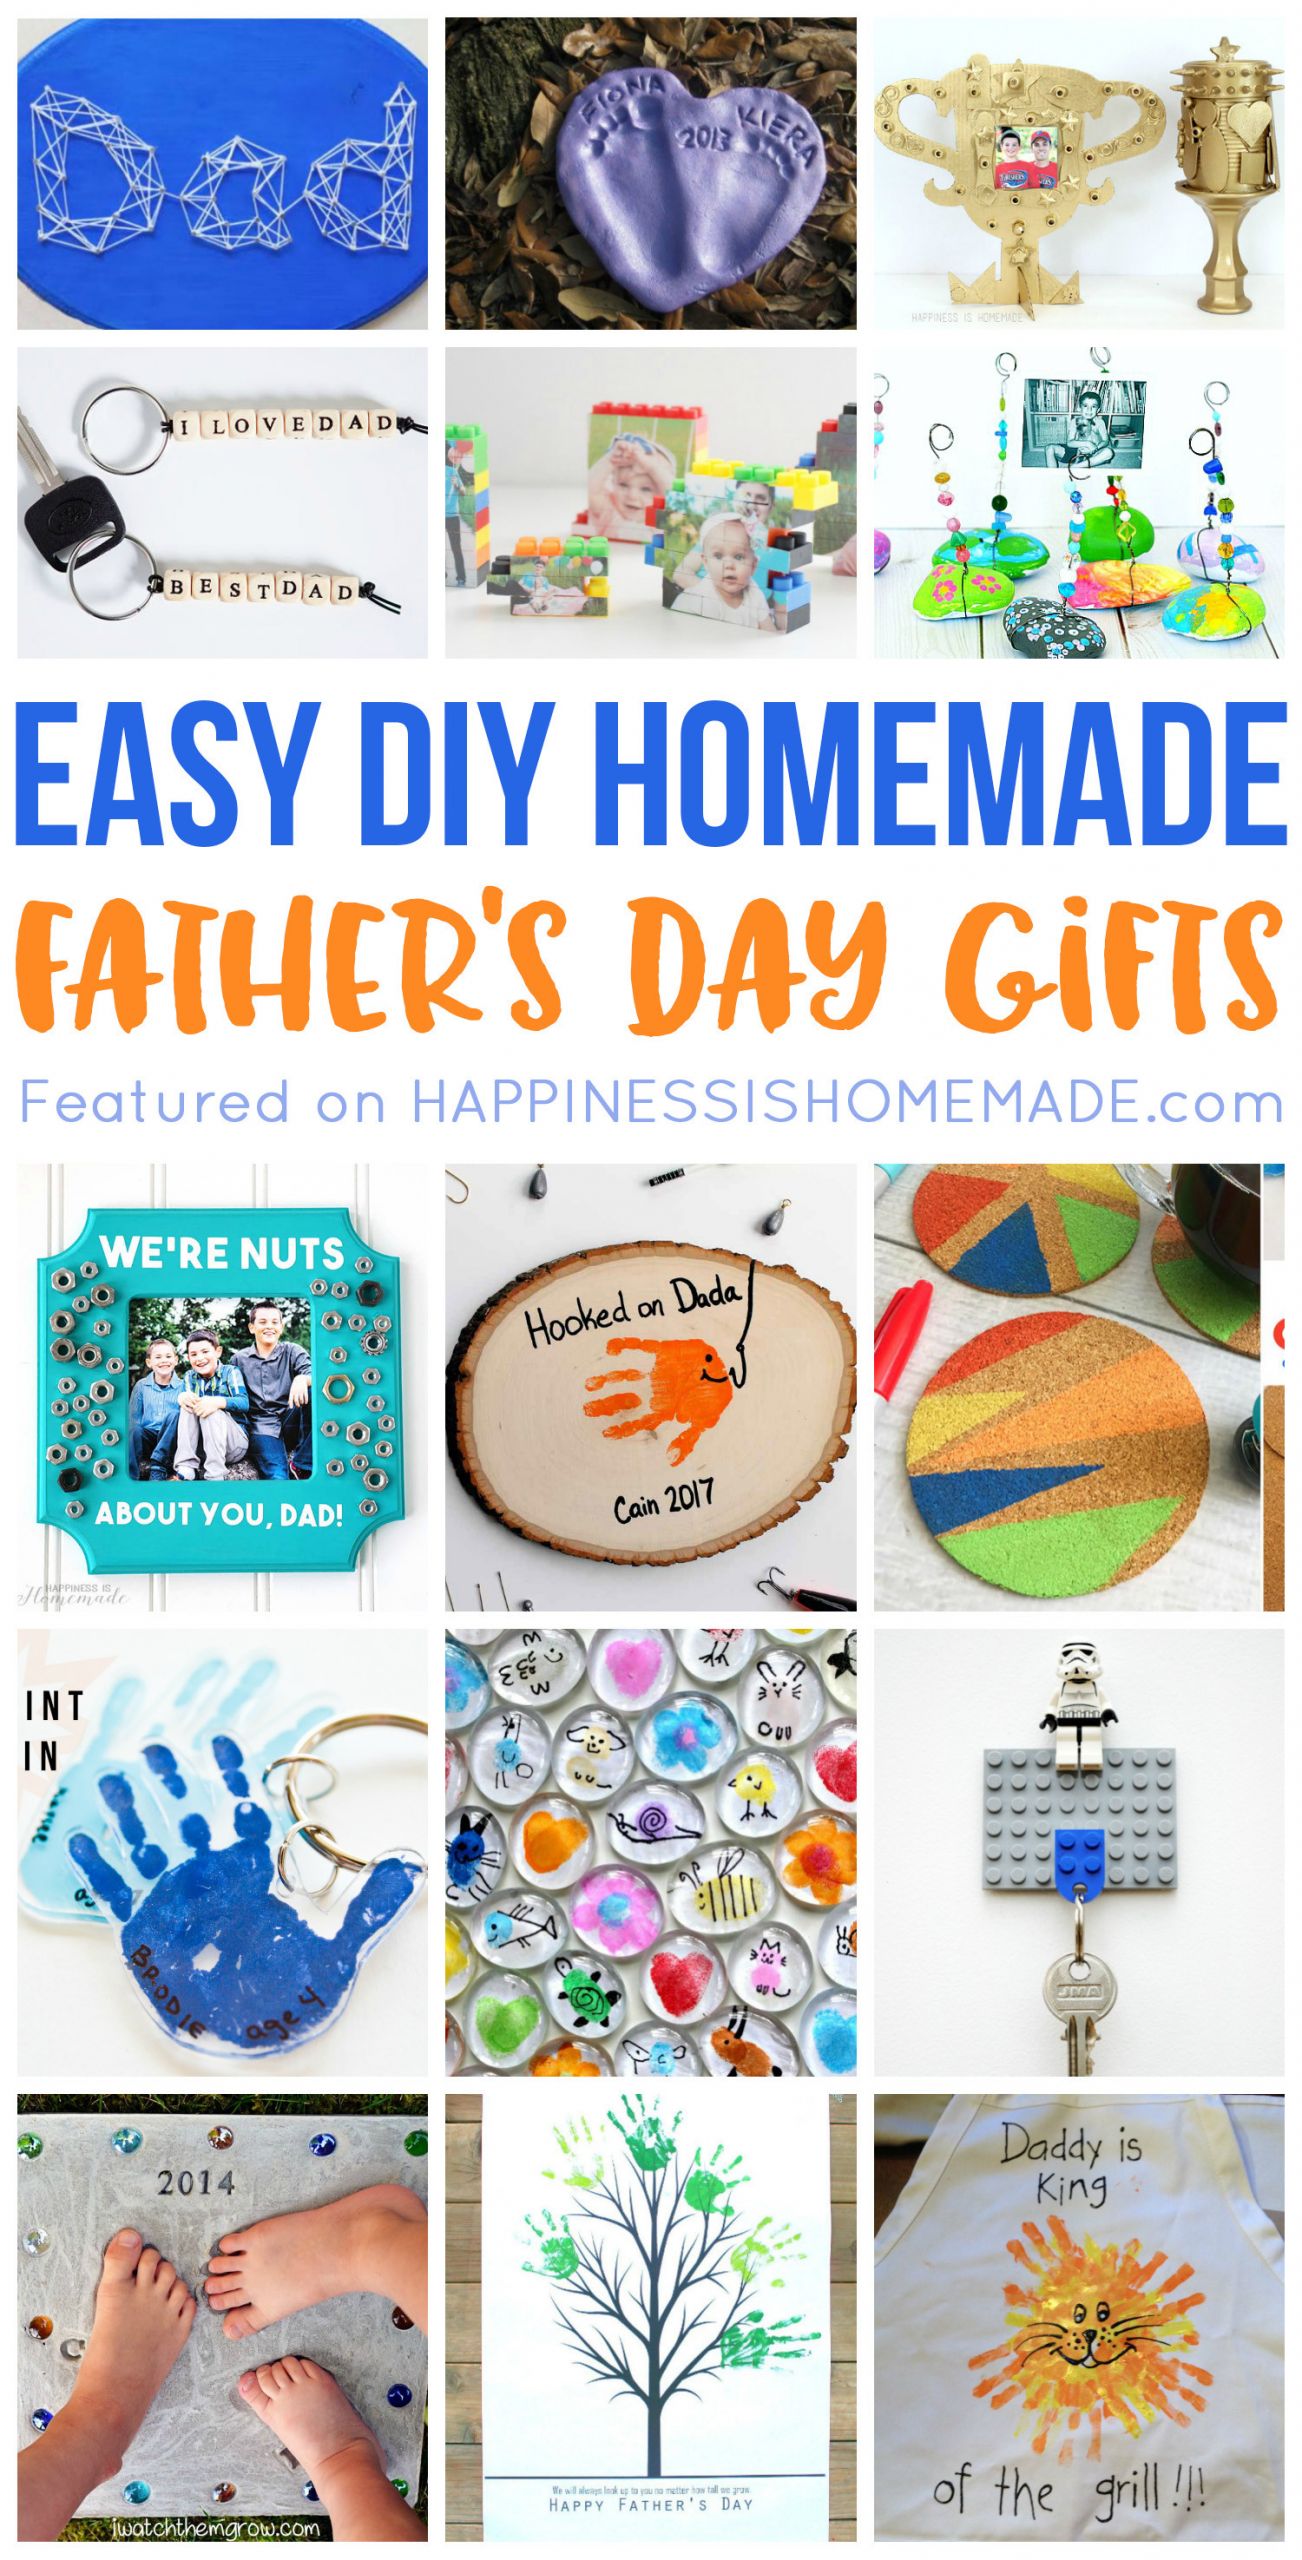 Homemade Fathers Day Gifts
 20 Homemade Father s Day Gifts That Kids Can Make